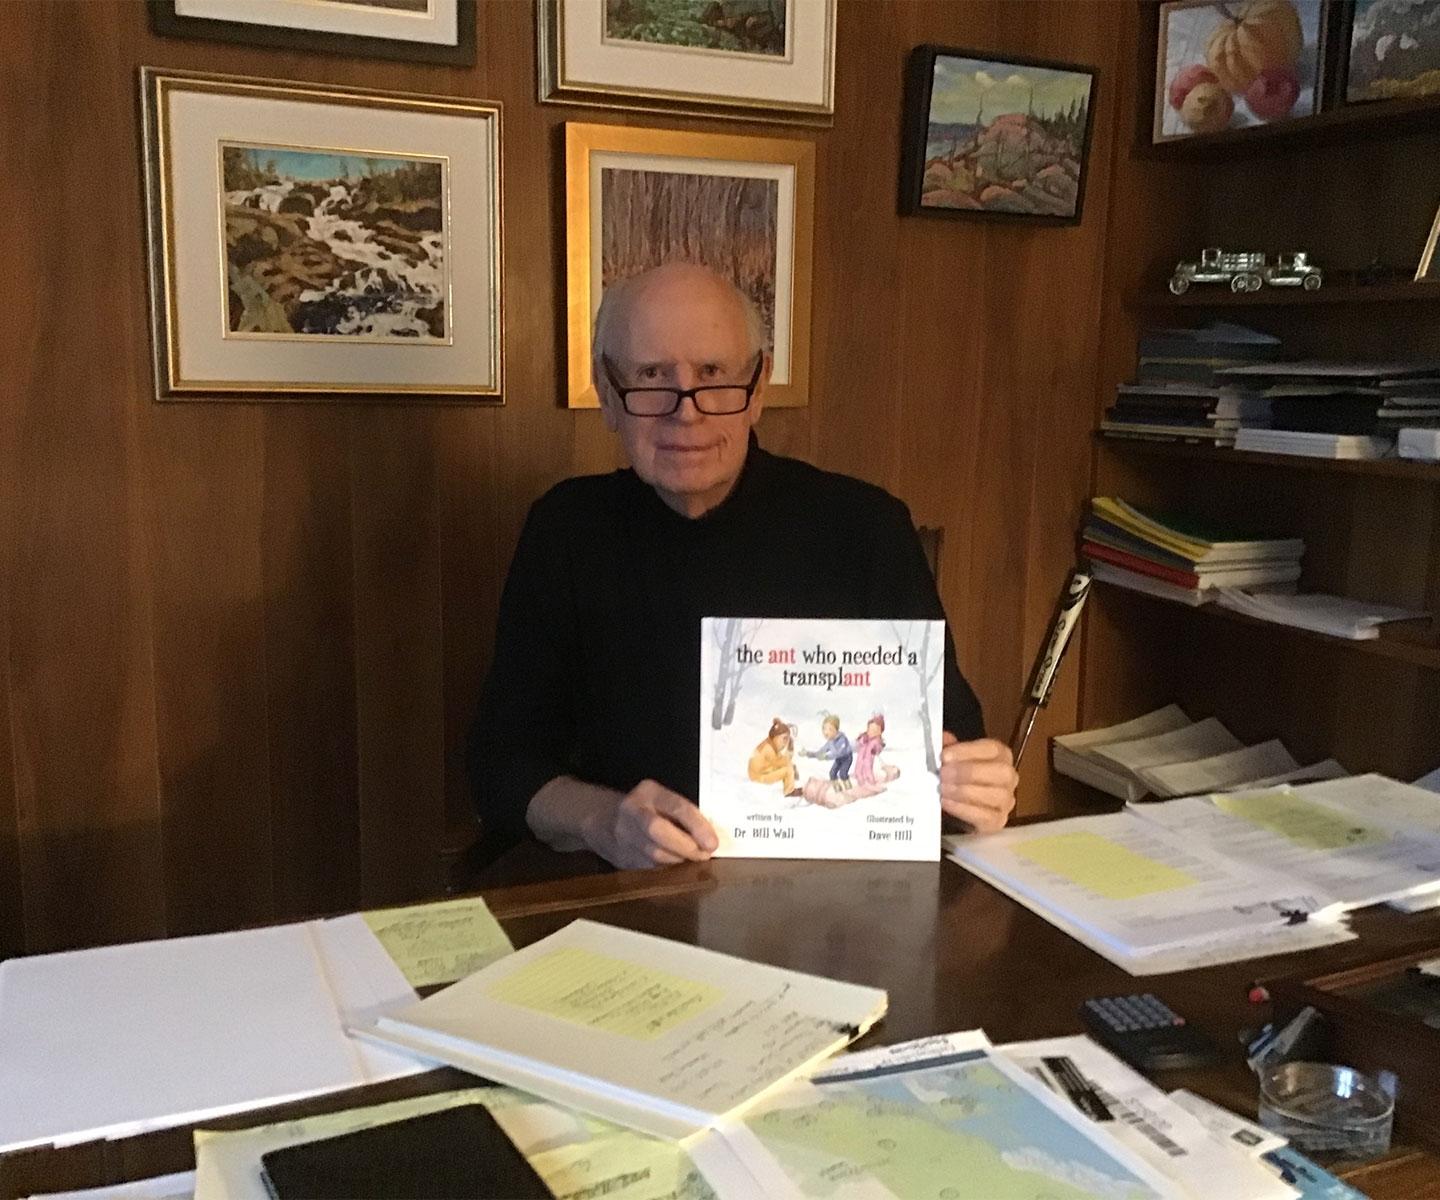 Dr. Wall sits at his desk displaying his children’s book the ant who needed a transplant.